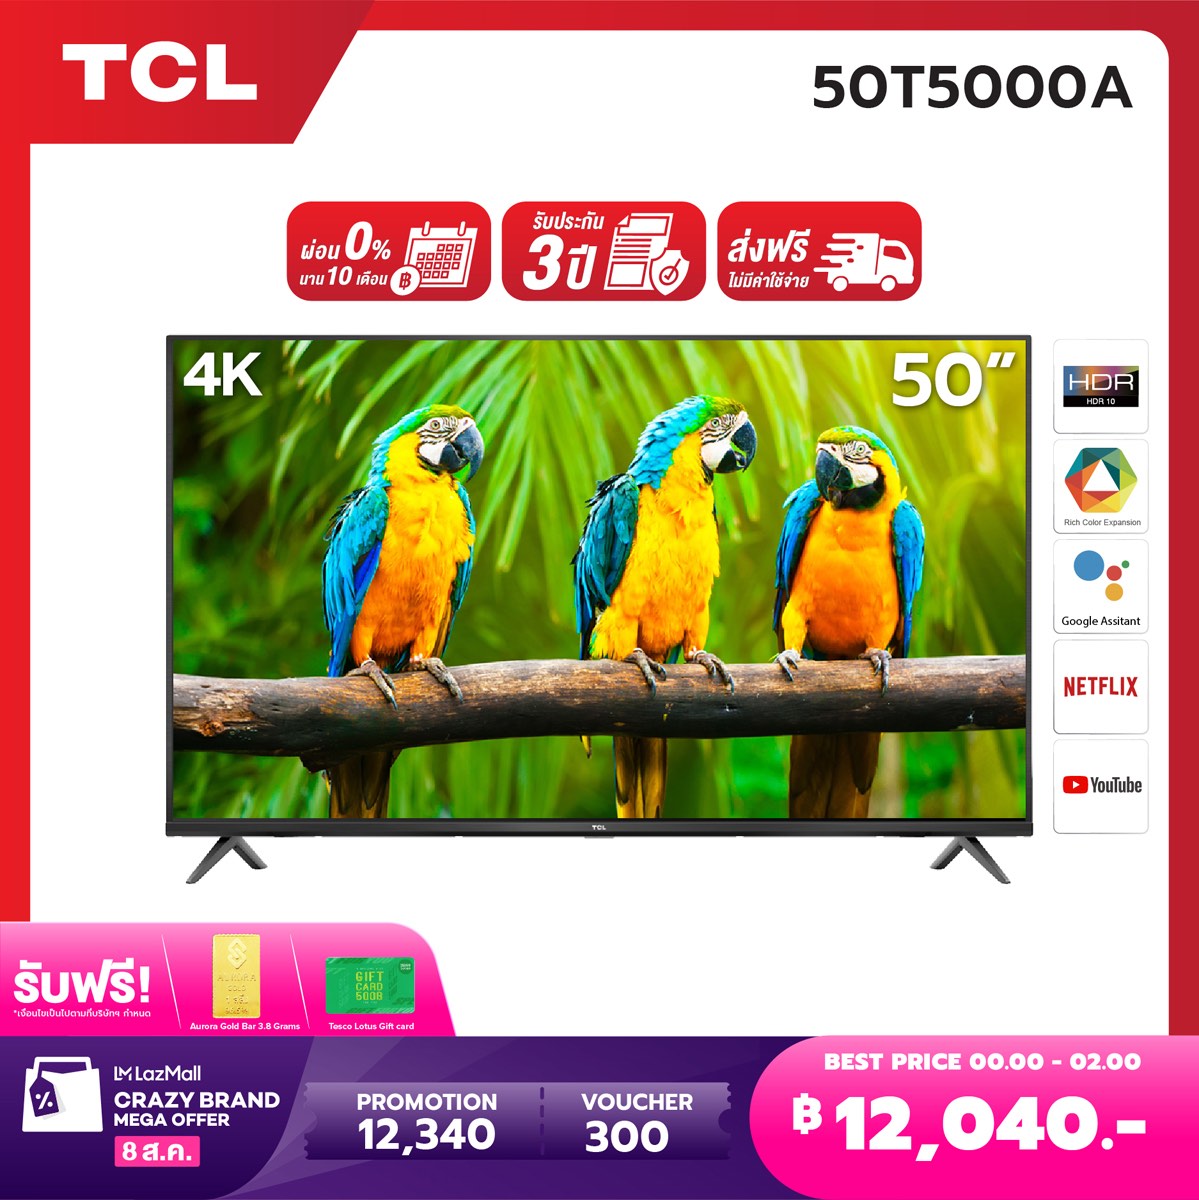 4K BEST SELLER NEW! TCL ทีวี 50 นิ้ว LED 4K UHD Android TV Wifi Smart TV OS (รุ่น 50T5000A) Google assistant & Netflix & Youtube-2G RAM+16G ROM, One Remote with Voice search